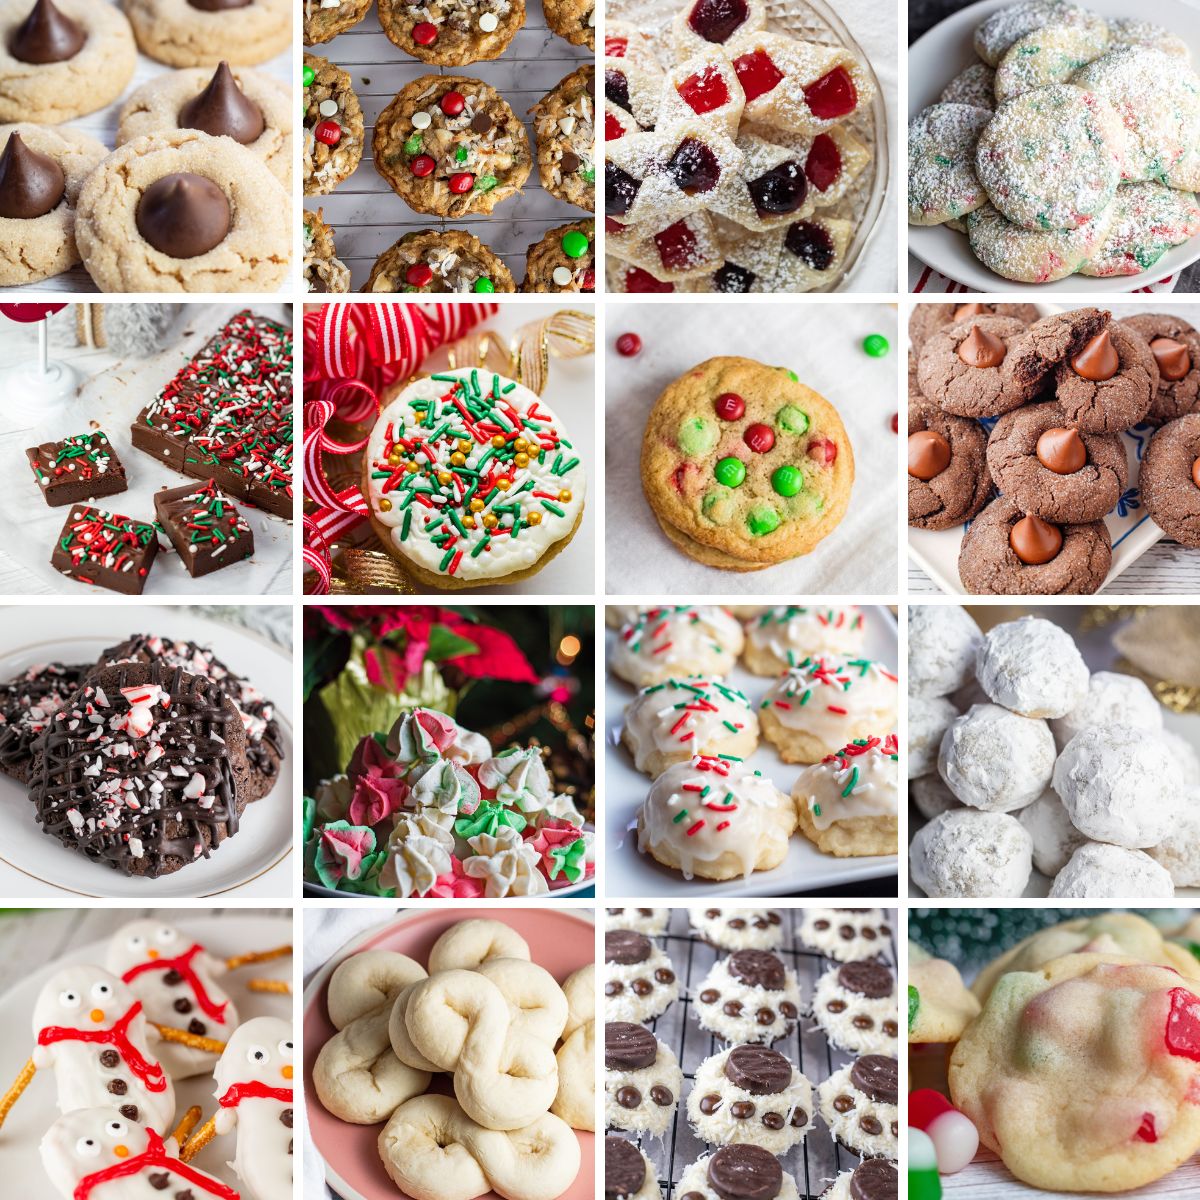 The top 100 Christmas cookies in the United States ranked by popularity and shared in this massive collection of amazing cookies to bake.